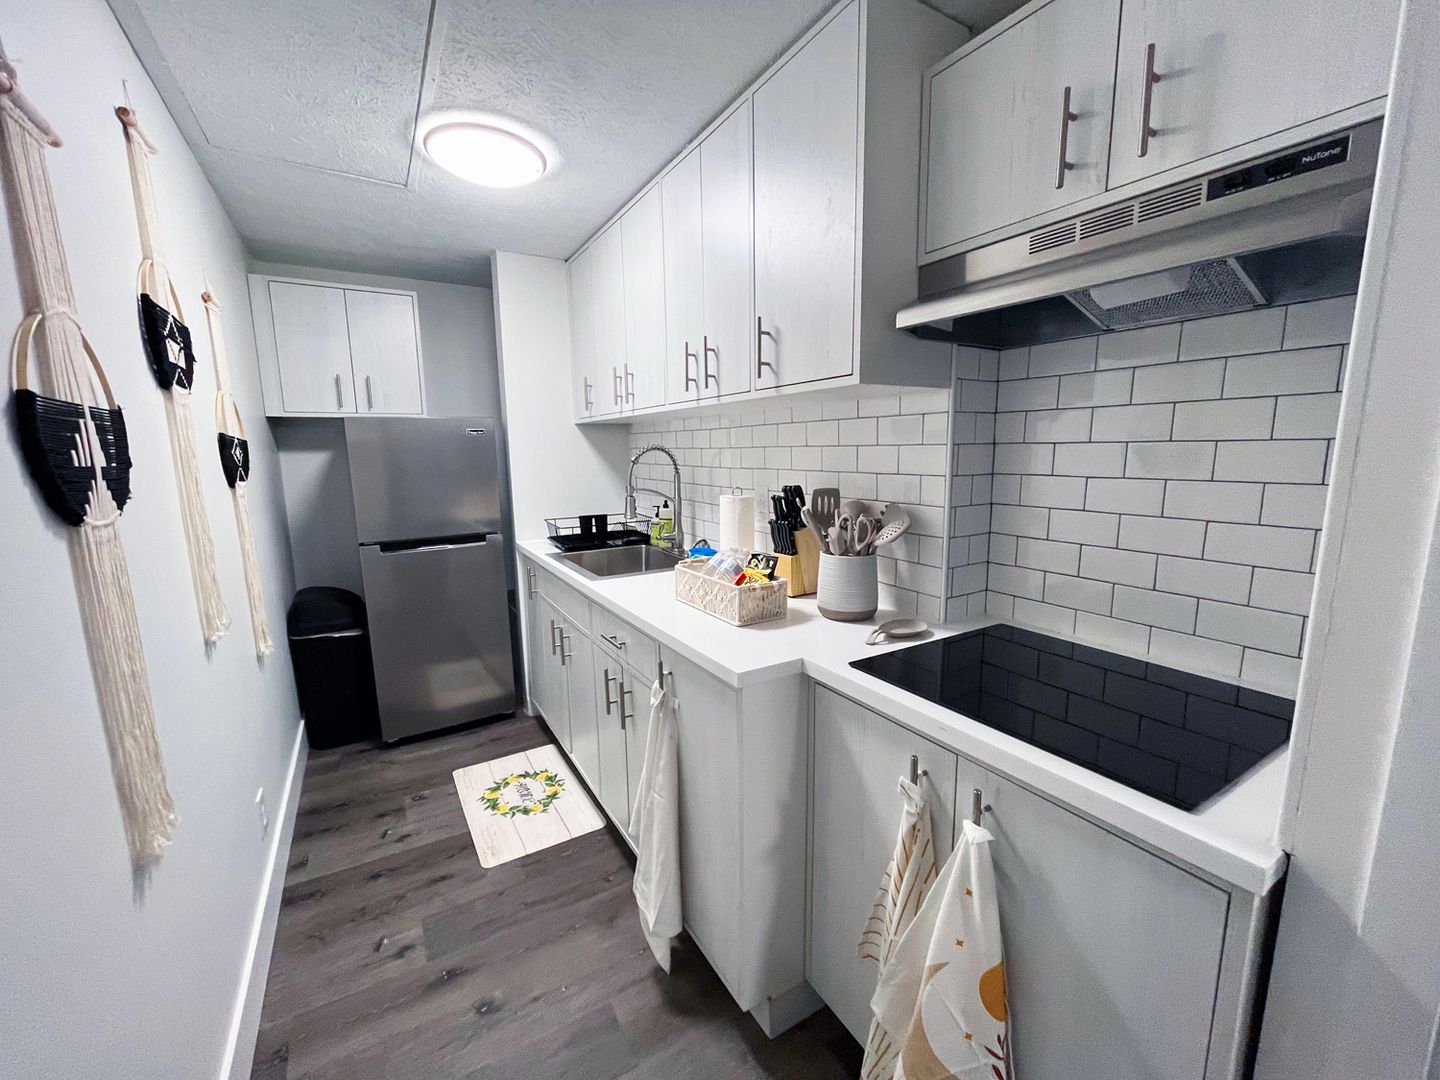 2 Bed and 1 Bath Apartments with In-Unit Laundry for Rent | Fully Renovated Image